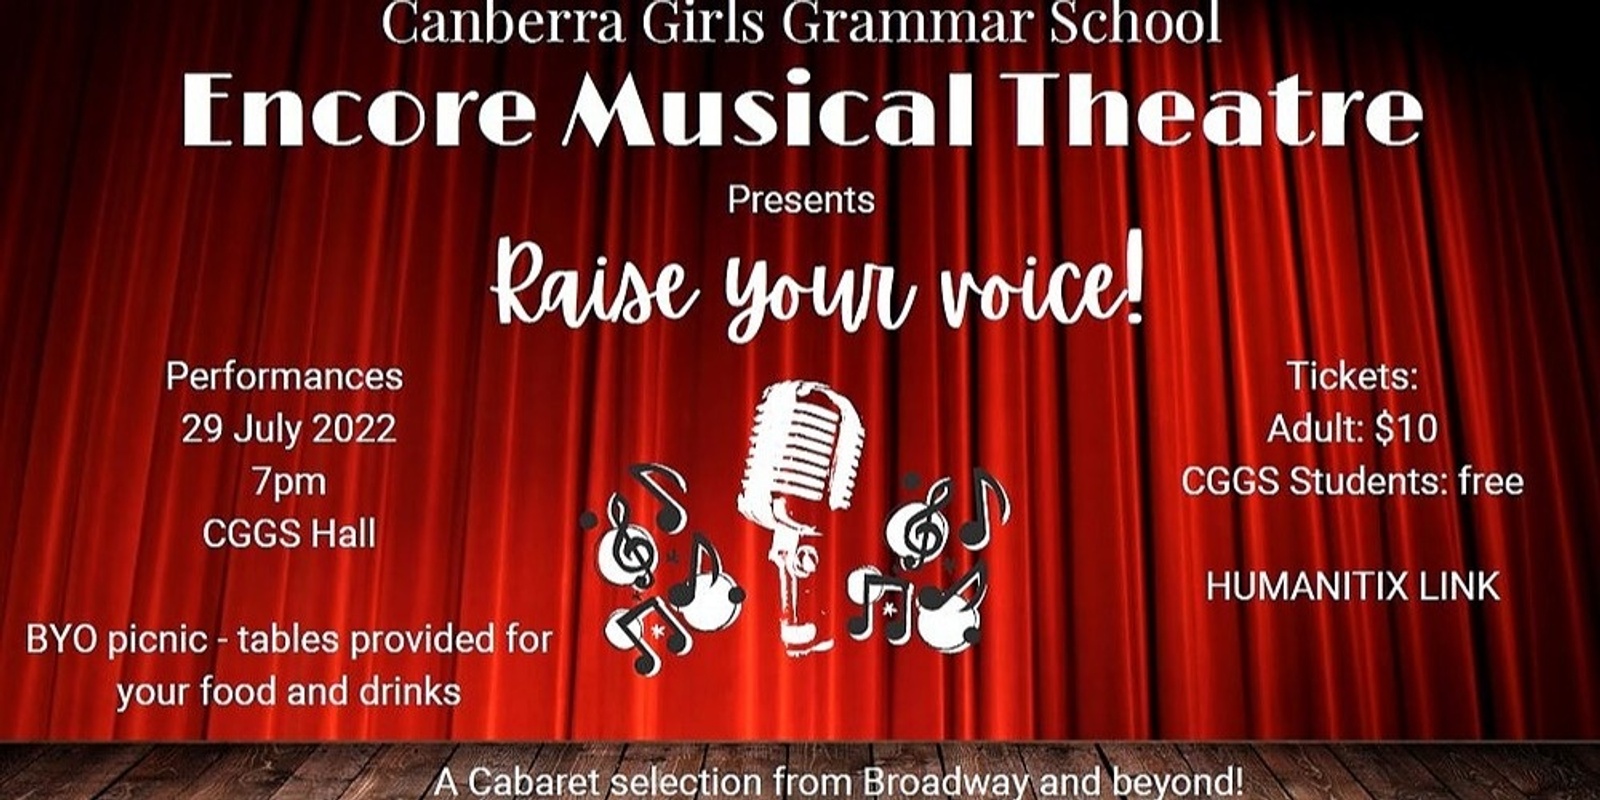 Banner image for CGGS Encore Musical Theatre